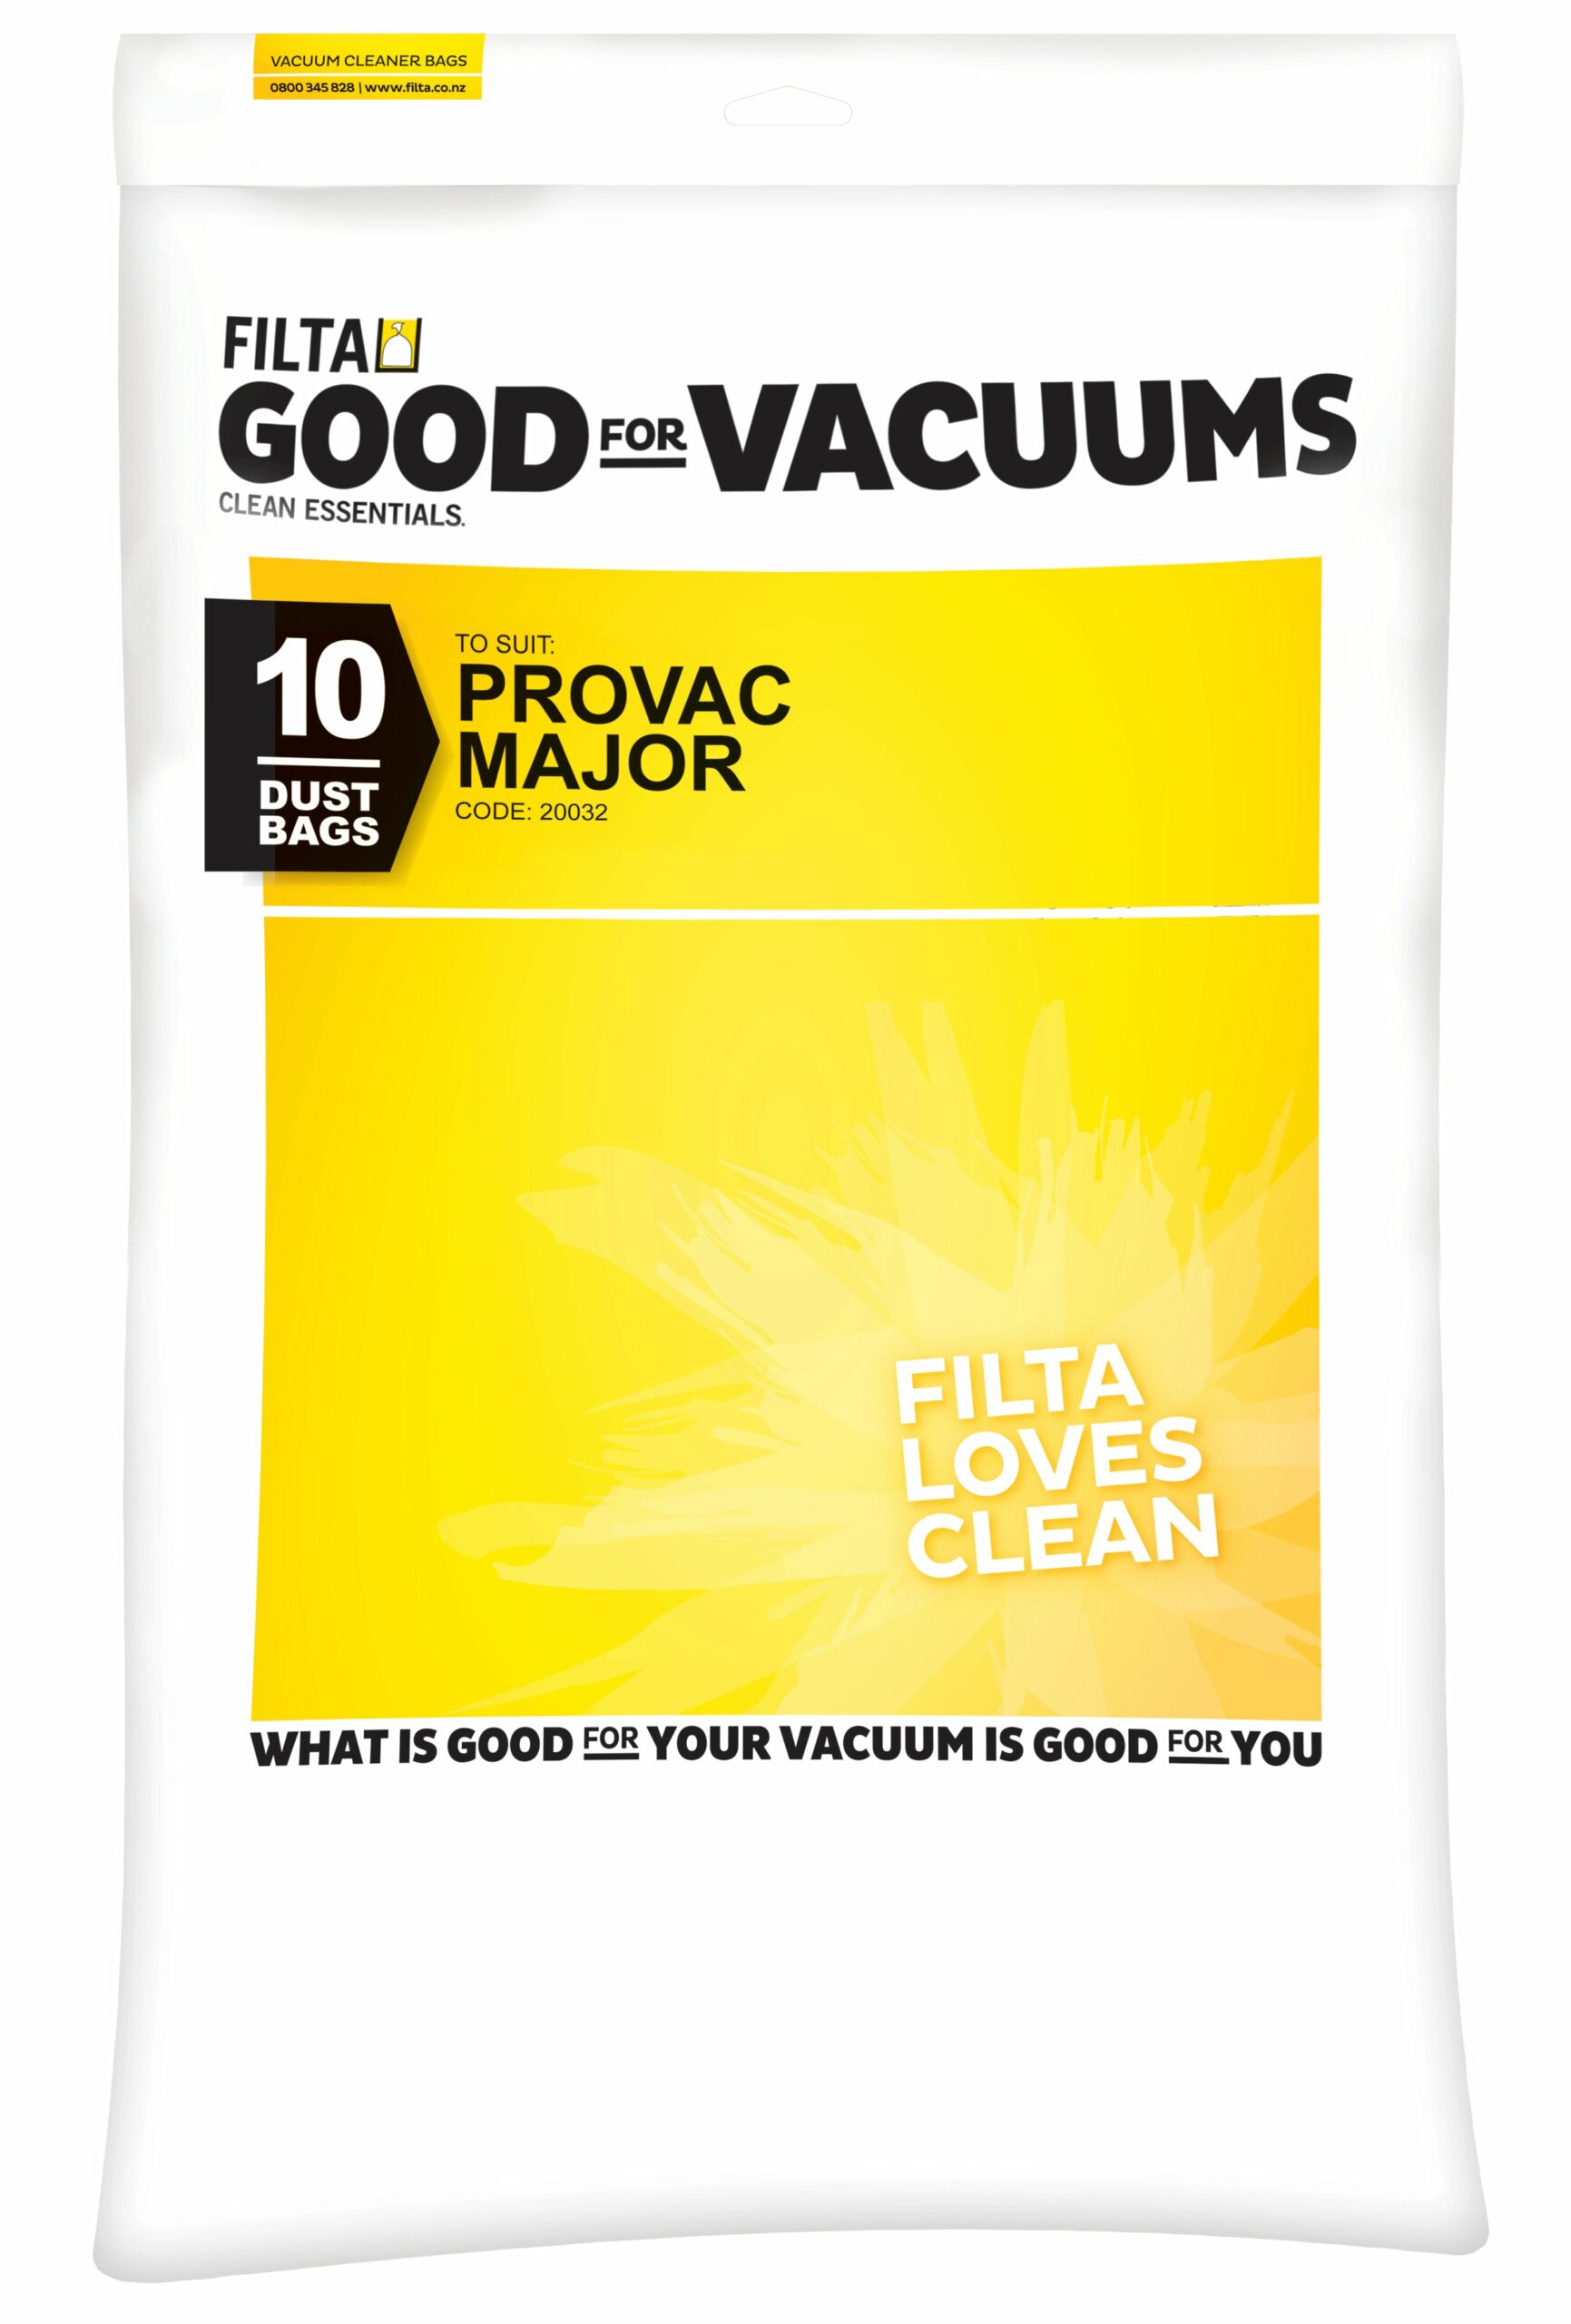 FILTA Provac Major Sms Multi Layered Vacuum Cleaner Bags 10 Pack (20032)